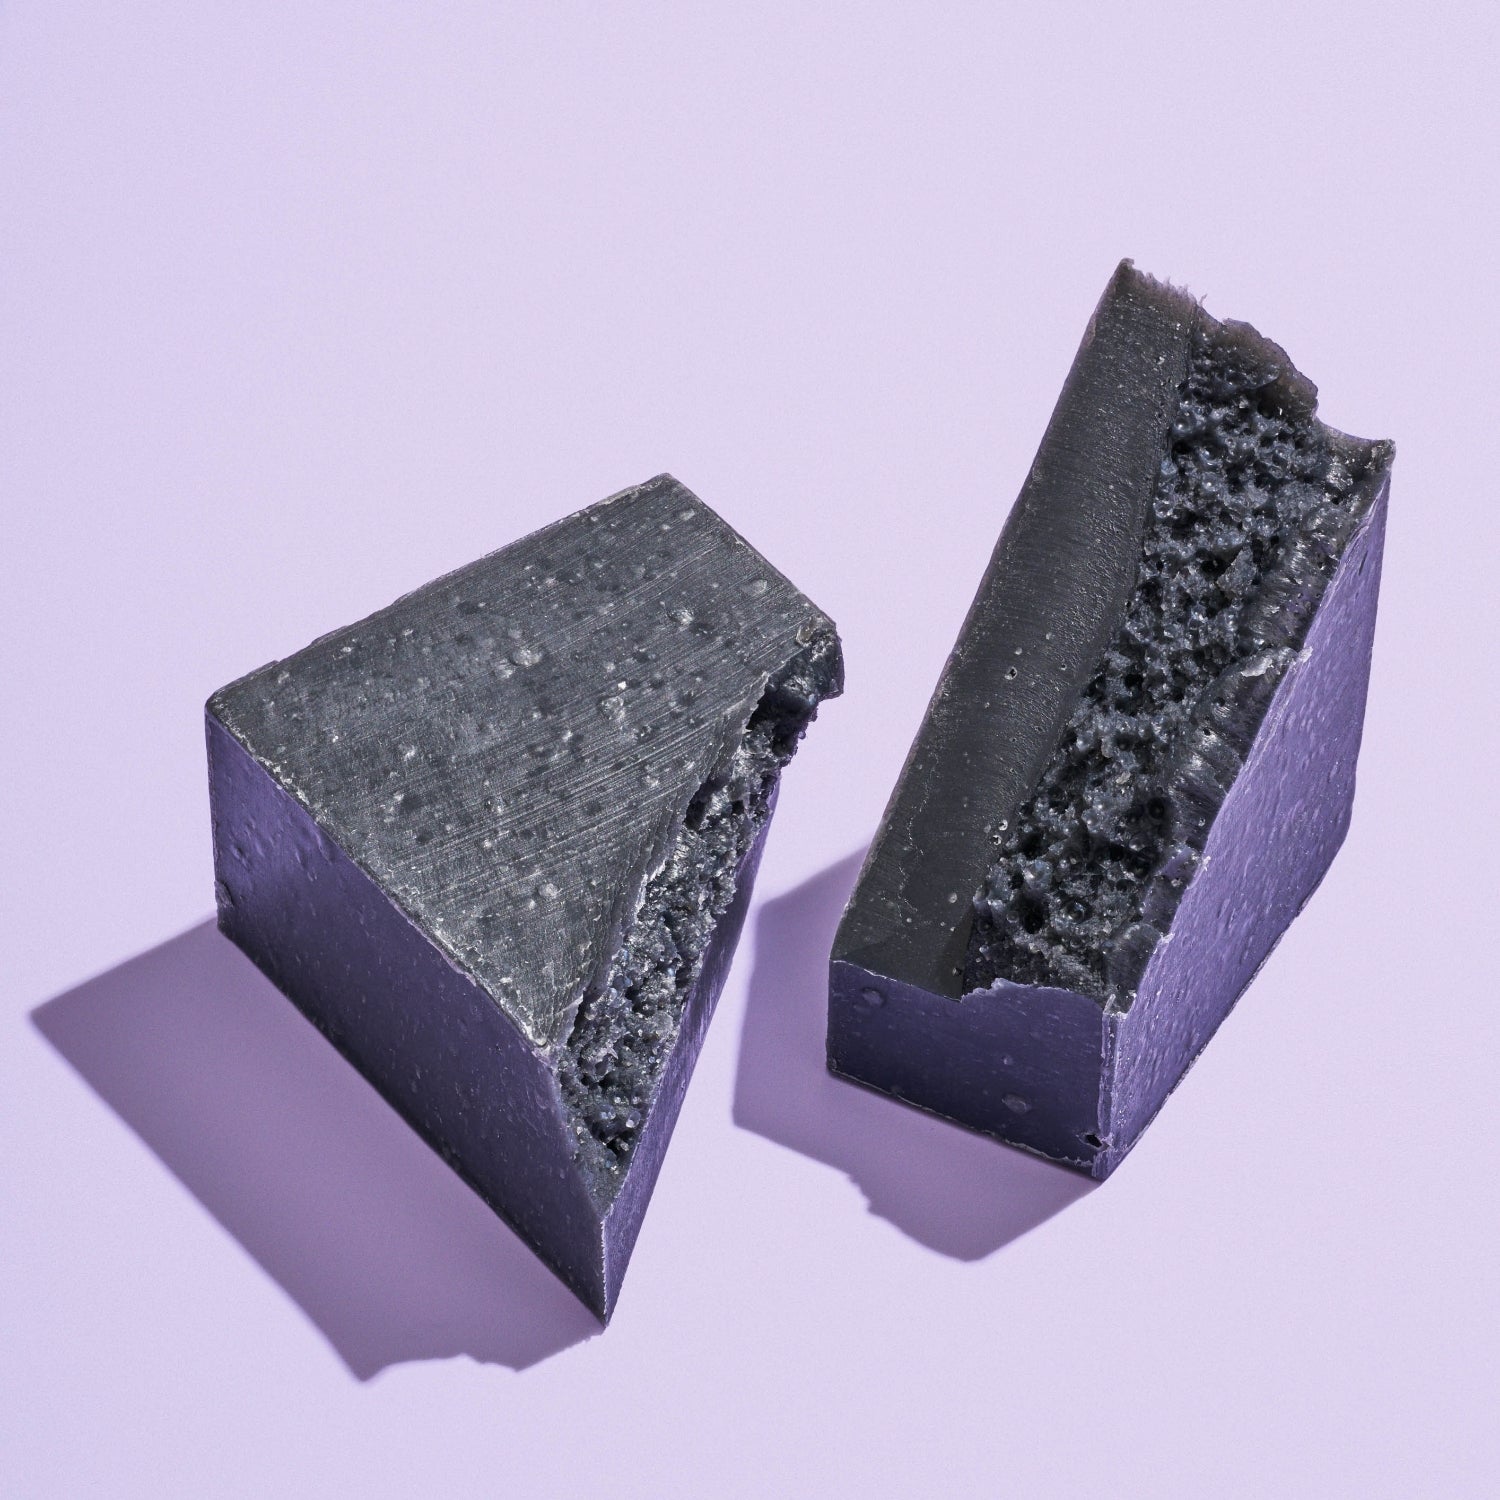 Bamboo Charcoal Detox Soap Bar split into two pieces against purple background